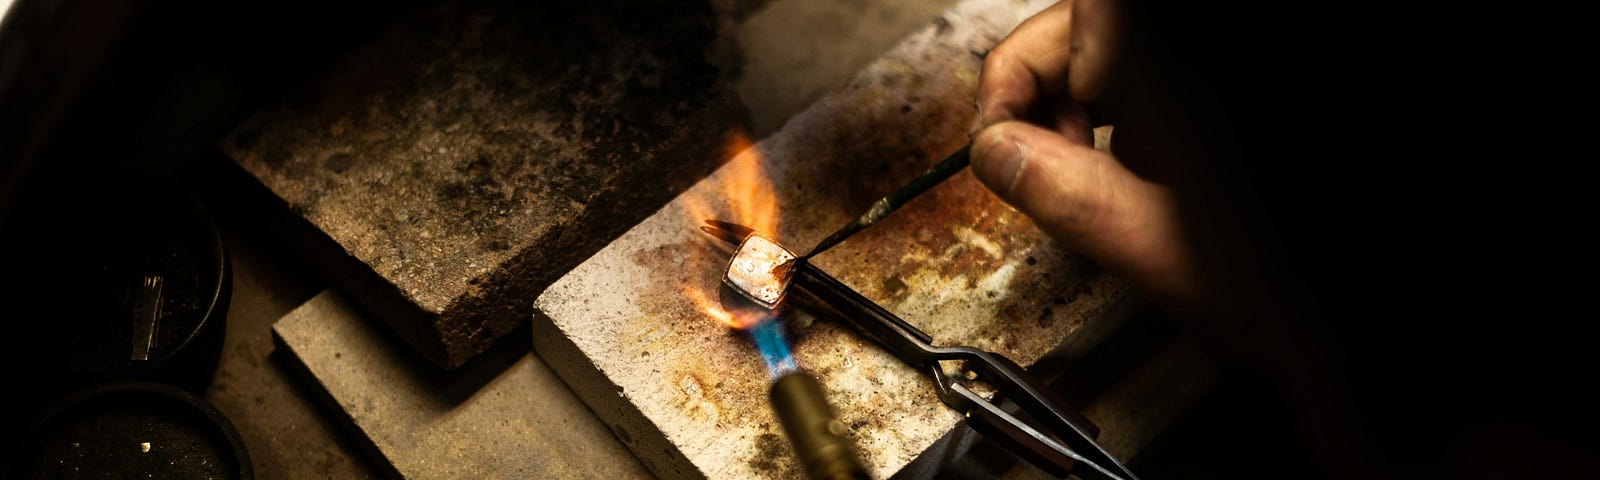 An artisan making jewelry on a small stone slab with wire and pliers and hot torch.